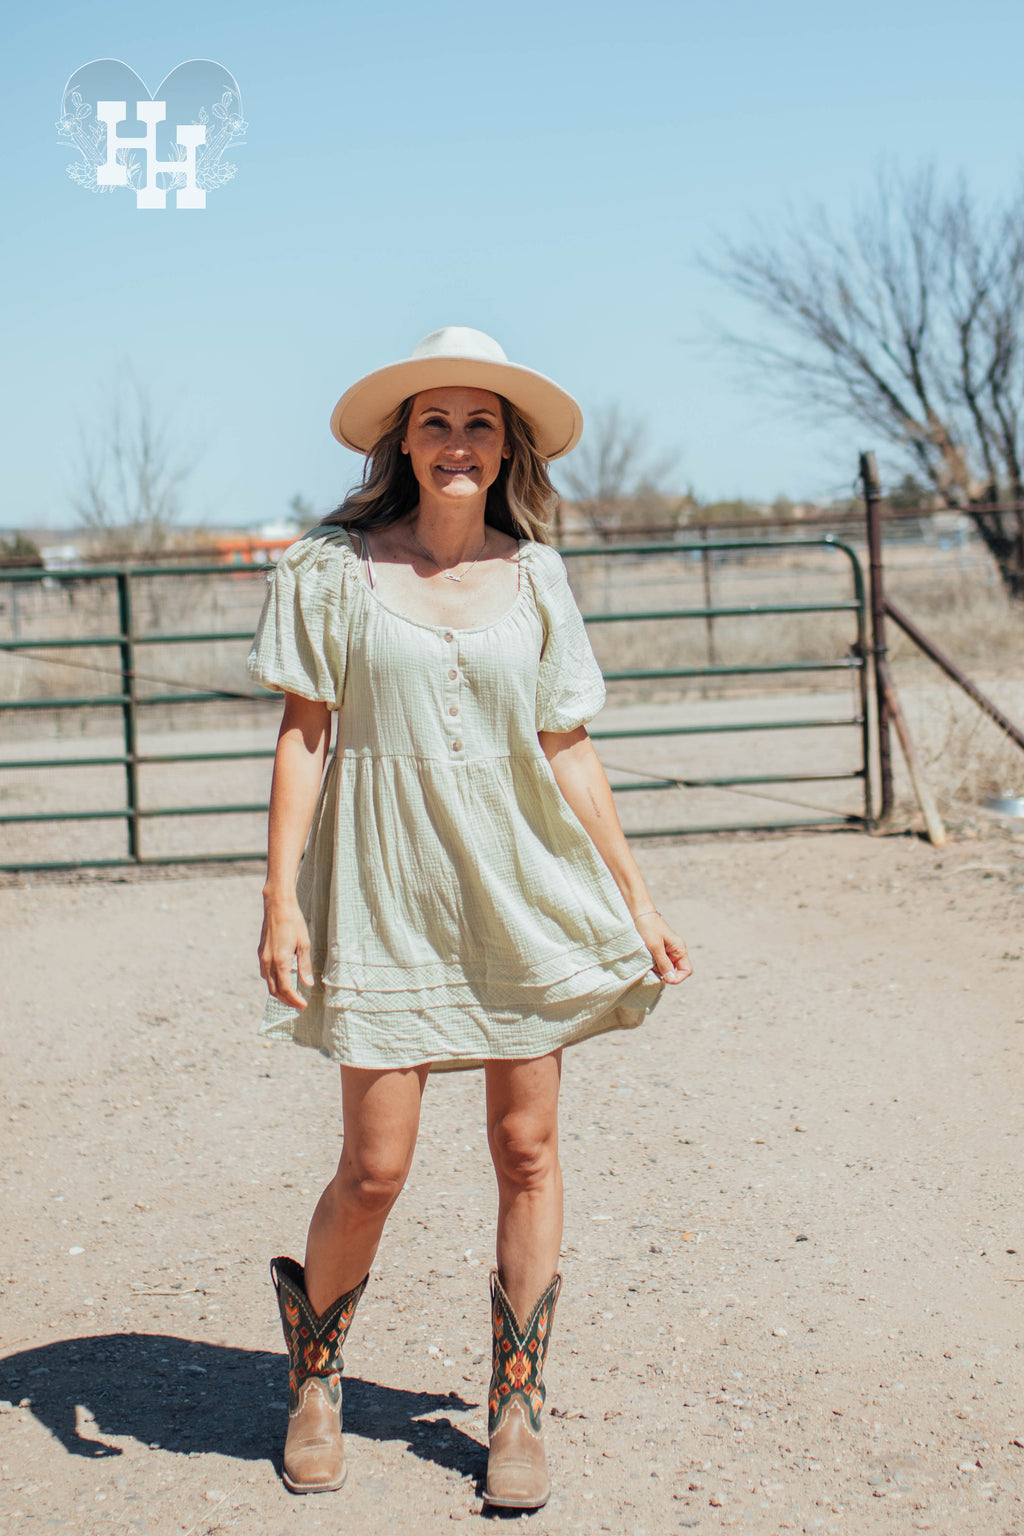 Girl standing in front of a gate on a ranch wearing a light green linen dress that is babydoll style with puff sleeves. Length is about 3 inches above the knee. She is also wearing cowboy boots and a cream colored wide brim hat.